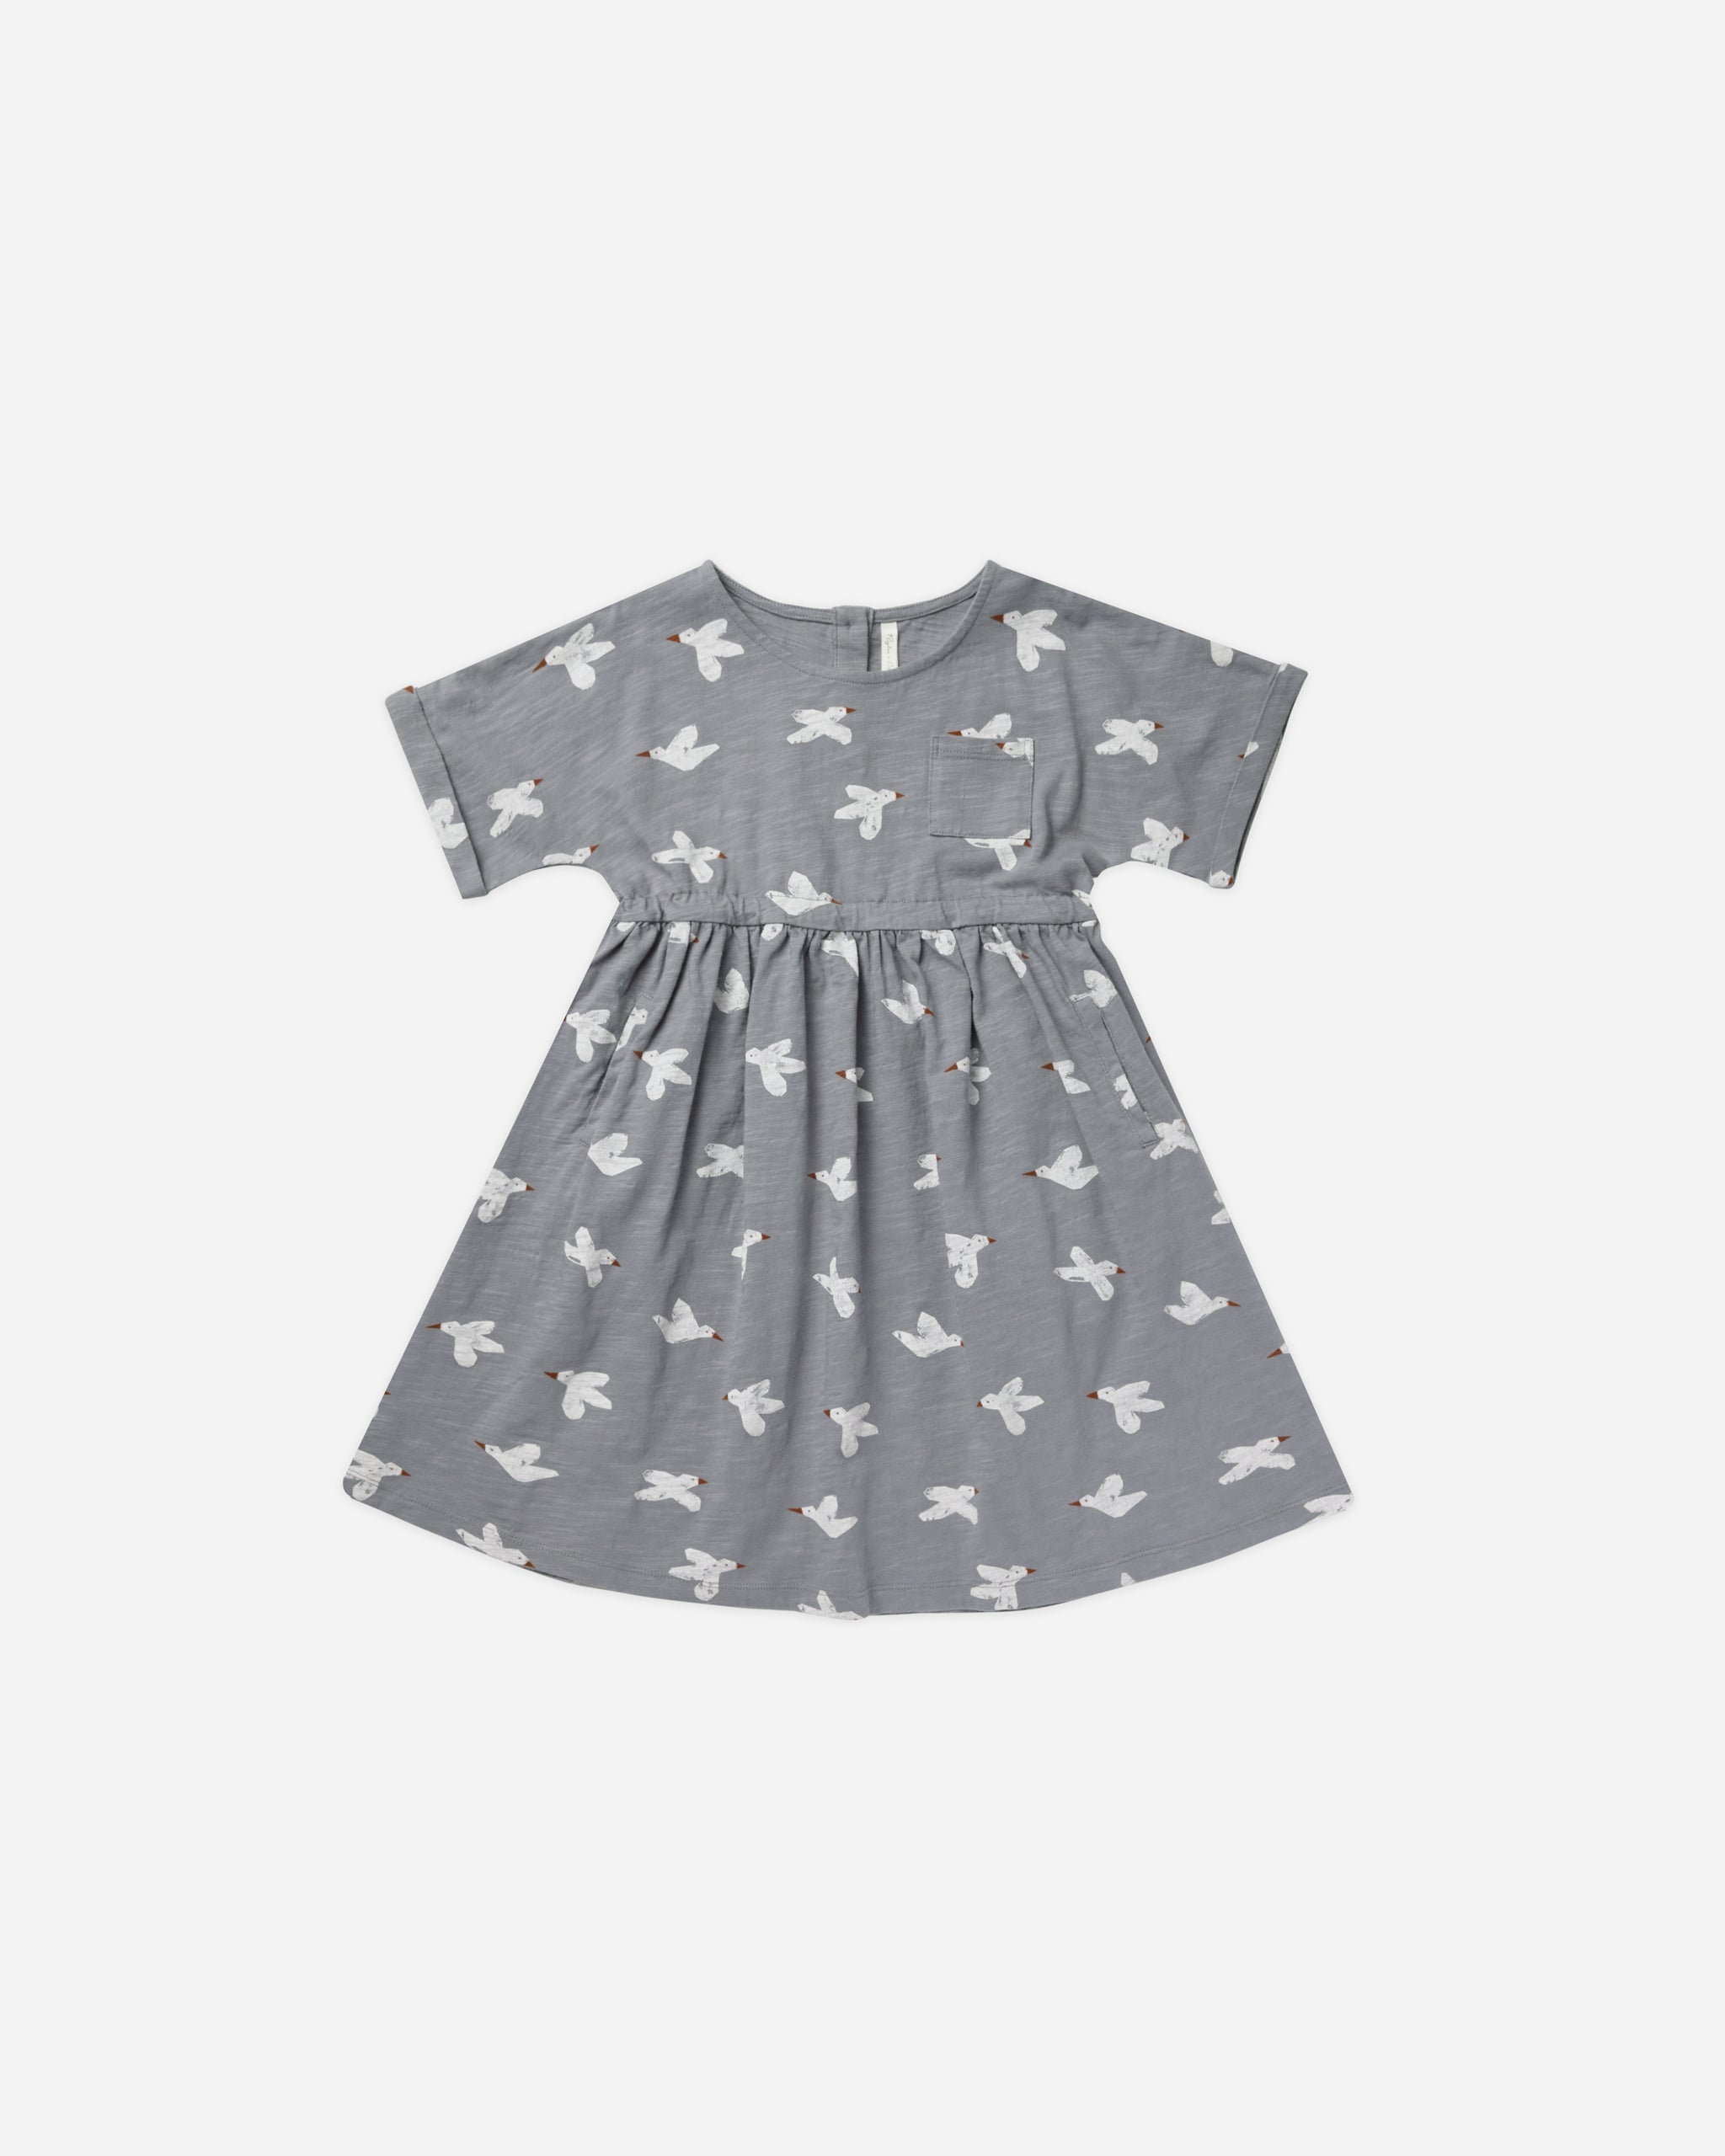 Kat T-Shirt Dress || Birds - Rylee + Cru | Kids Clothes | Trendy Baby Clothes | Modern Infant Outfits |